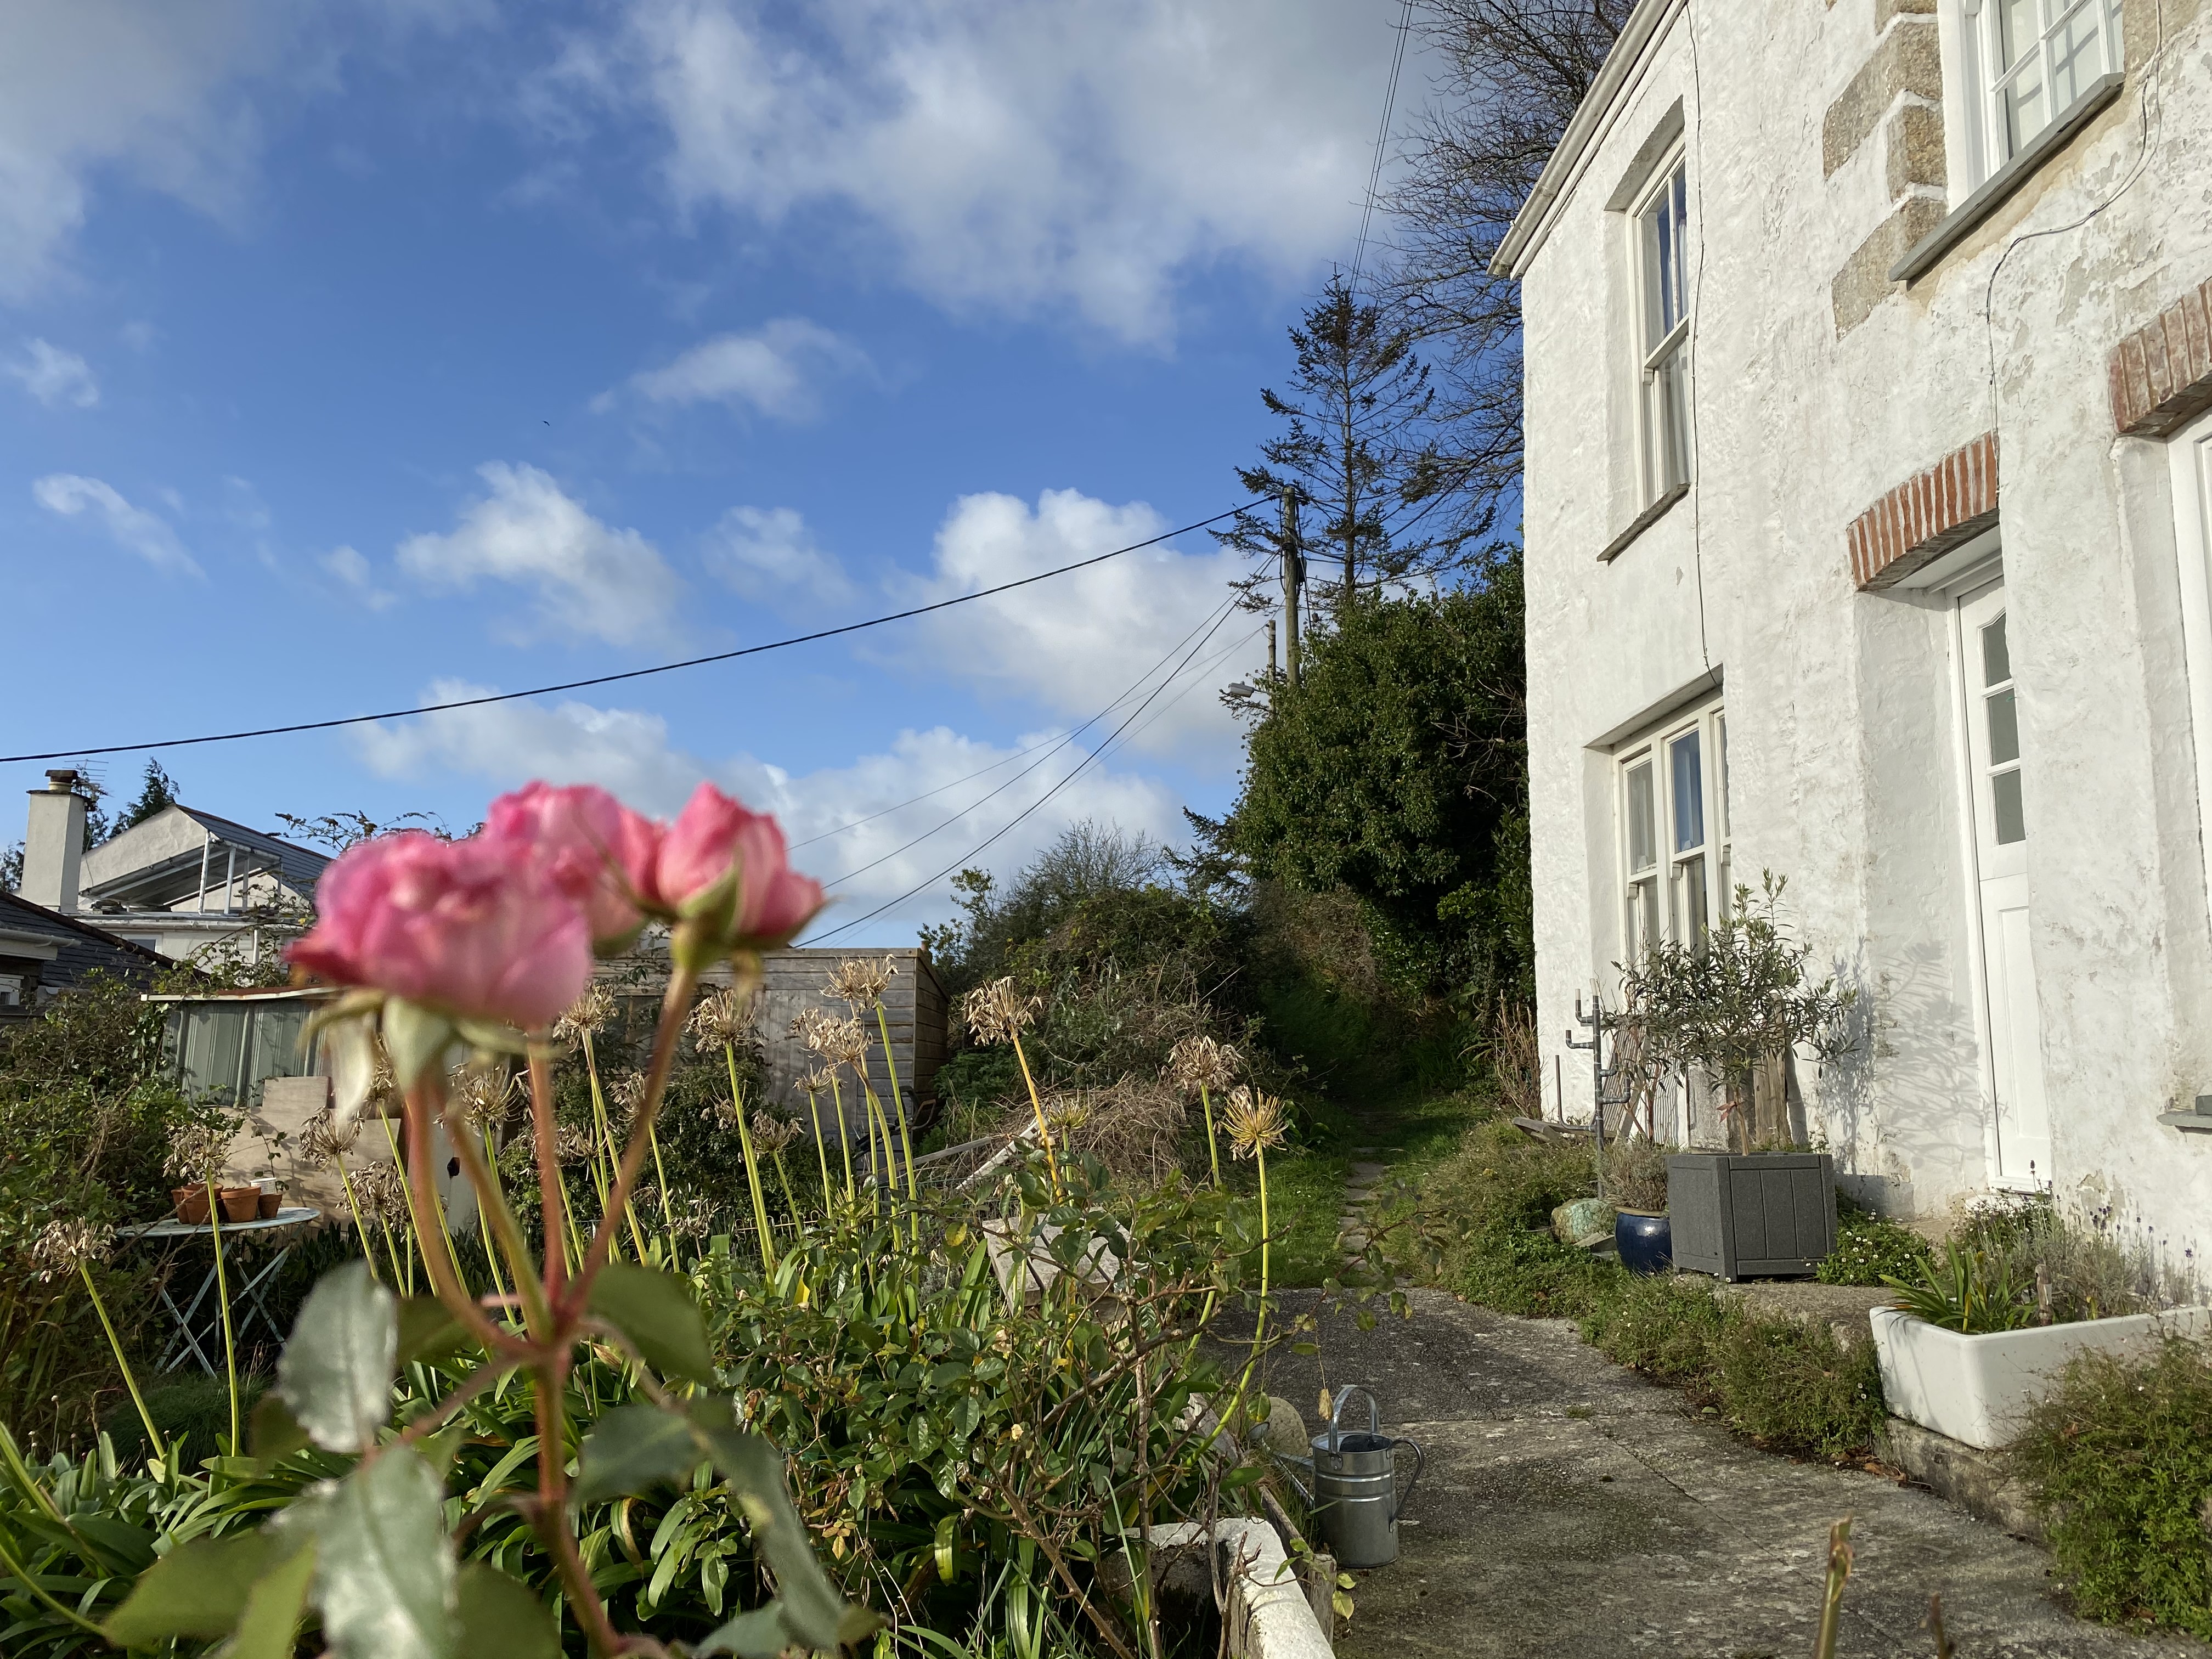 Cornish cottage with pink rose buds in the foreground on a blue sky